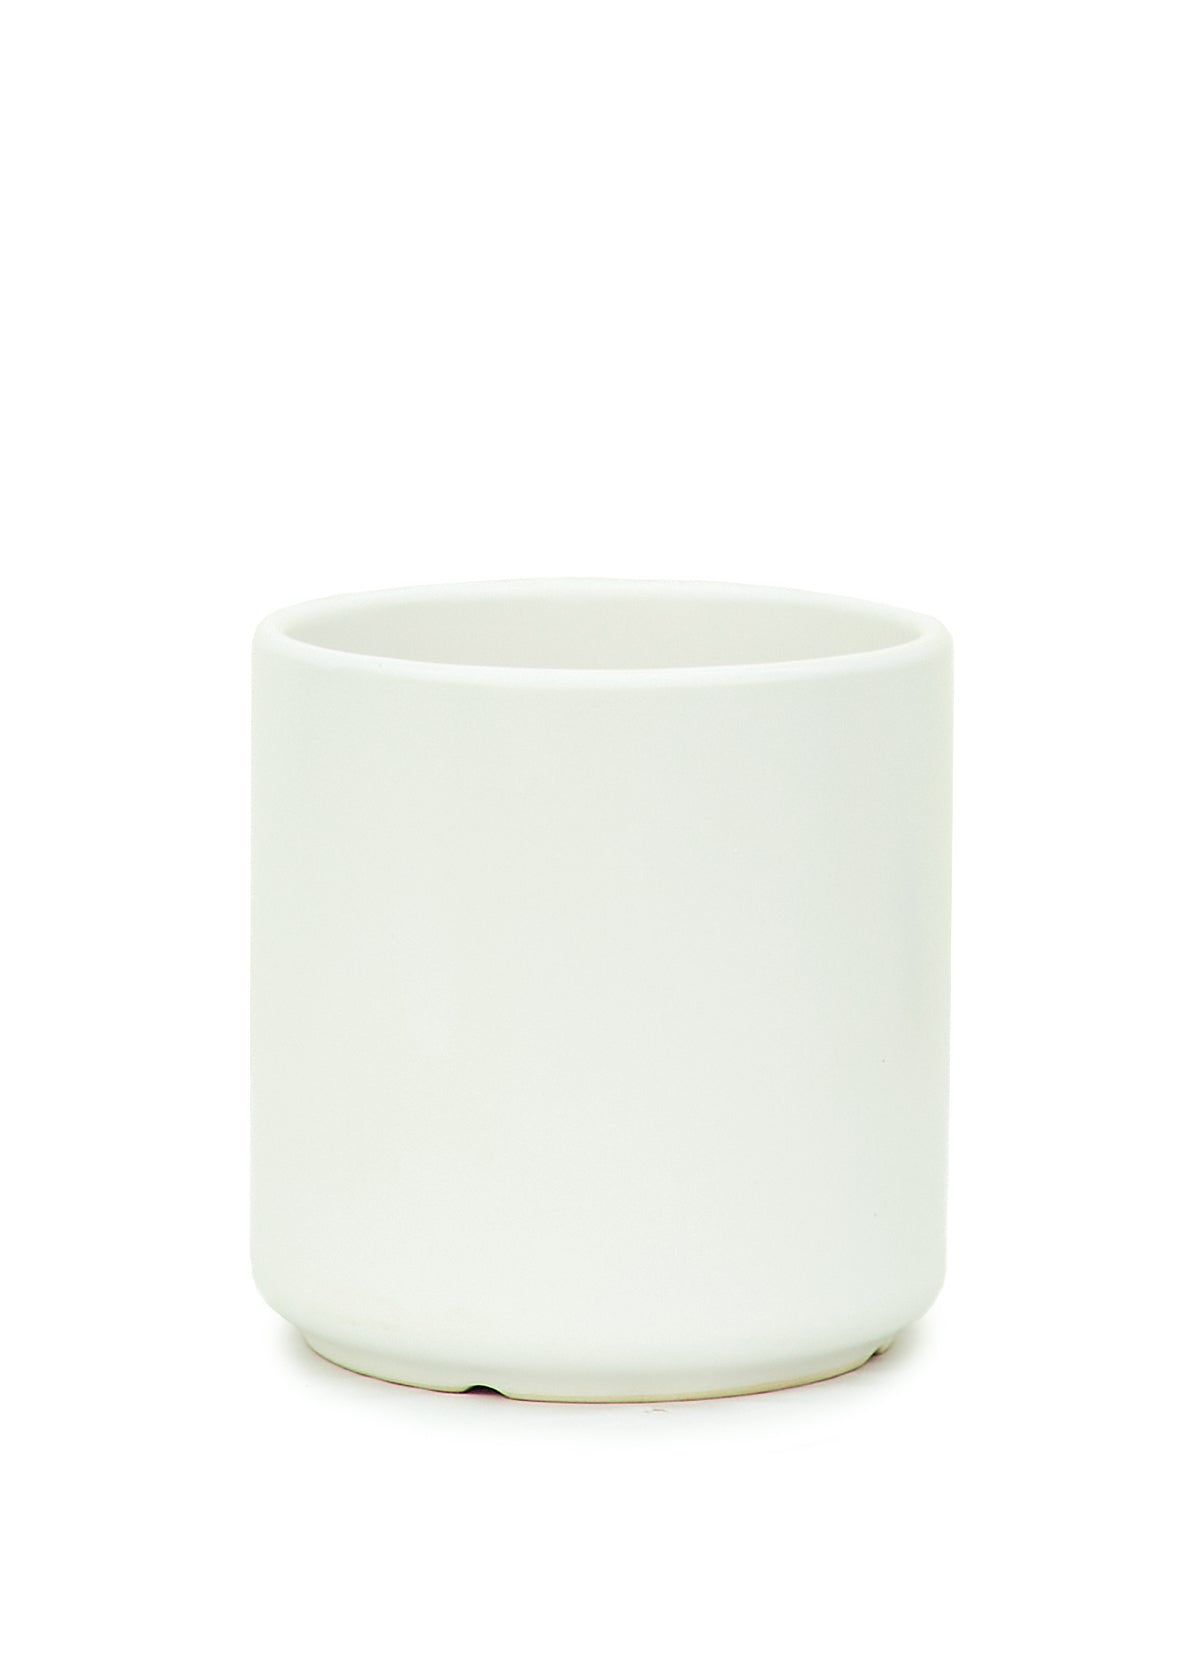 Cylindrical Ceramic Planter, White 5" Wide